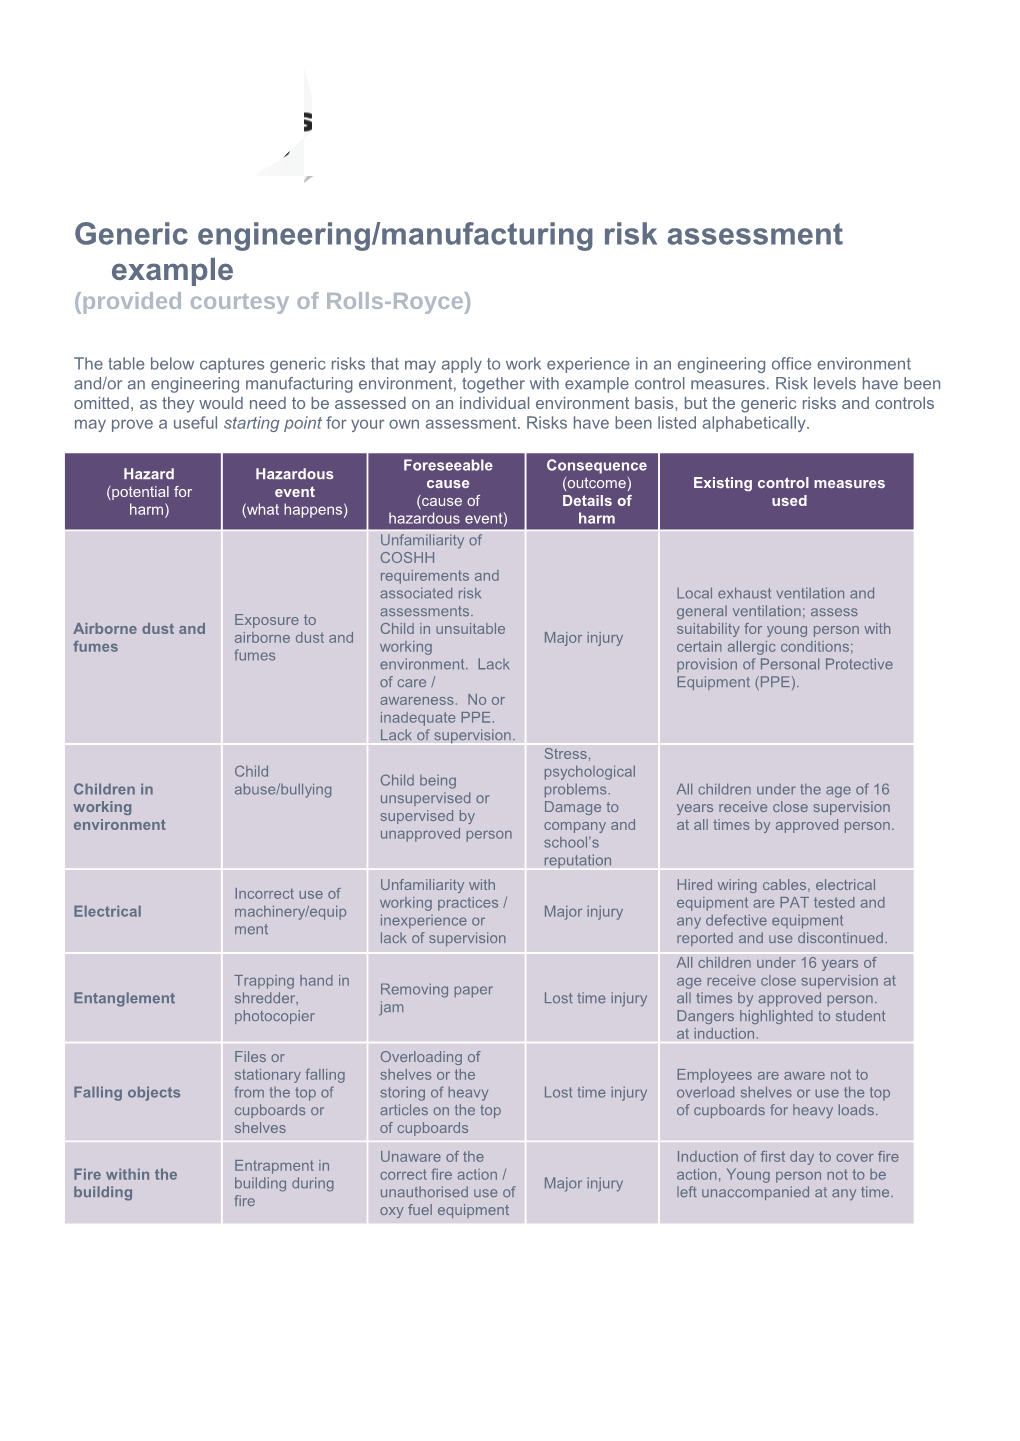 Generic Engineering/Manufacturing Risk Assessment Example